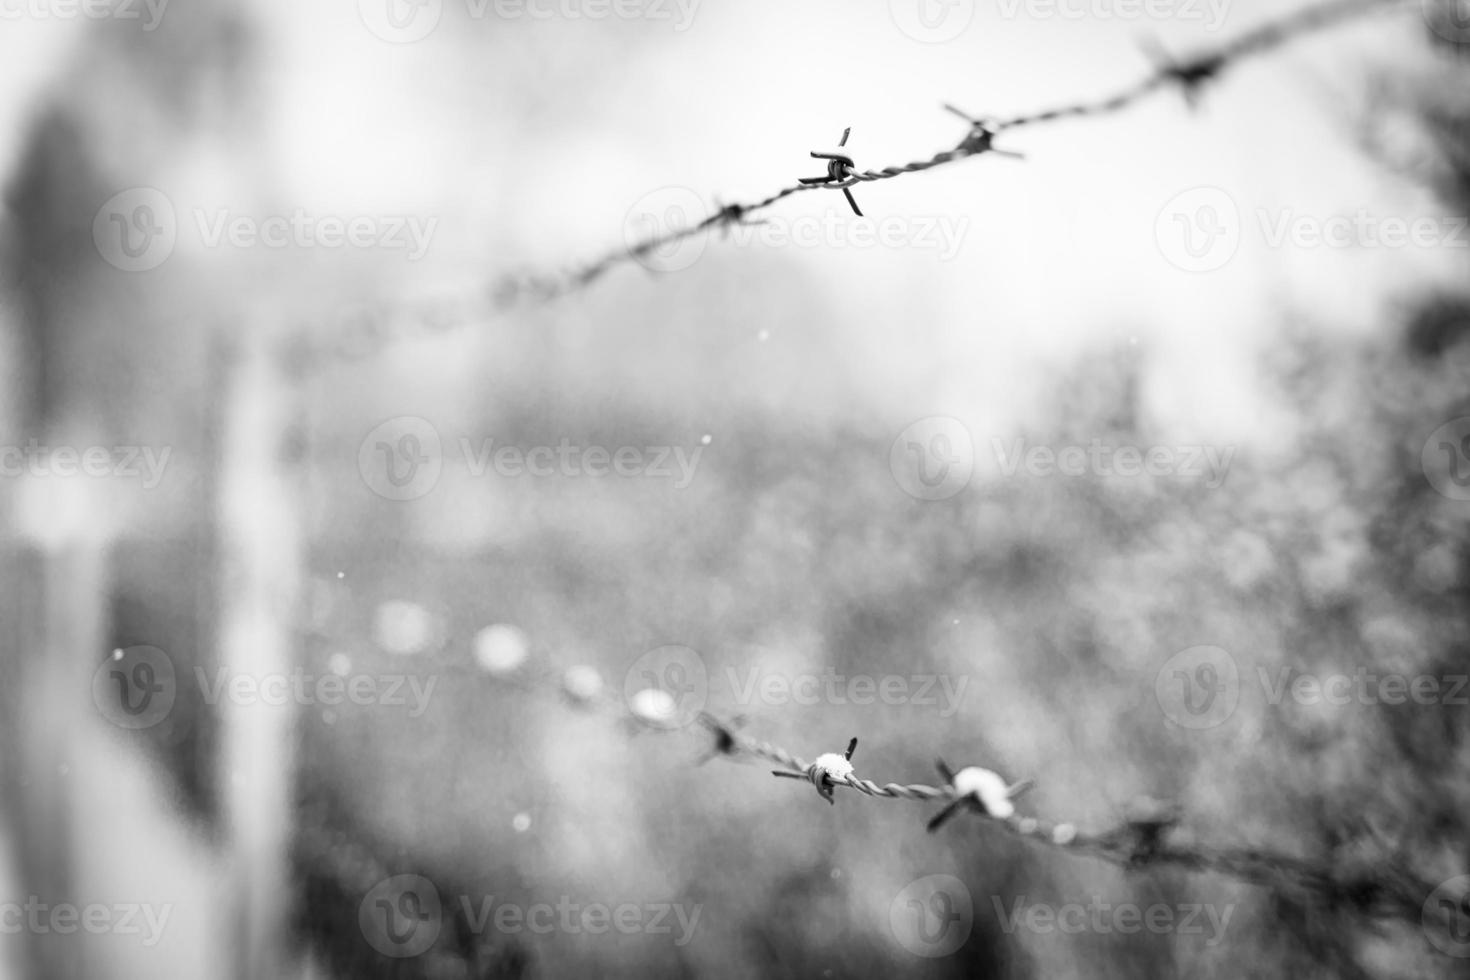 Second world war concept, barbed wire fence against cold winter background. A barbed wire on the fence of the fenced territory. Camp or jail during war, fence abstract background concept photo